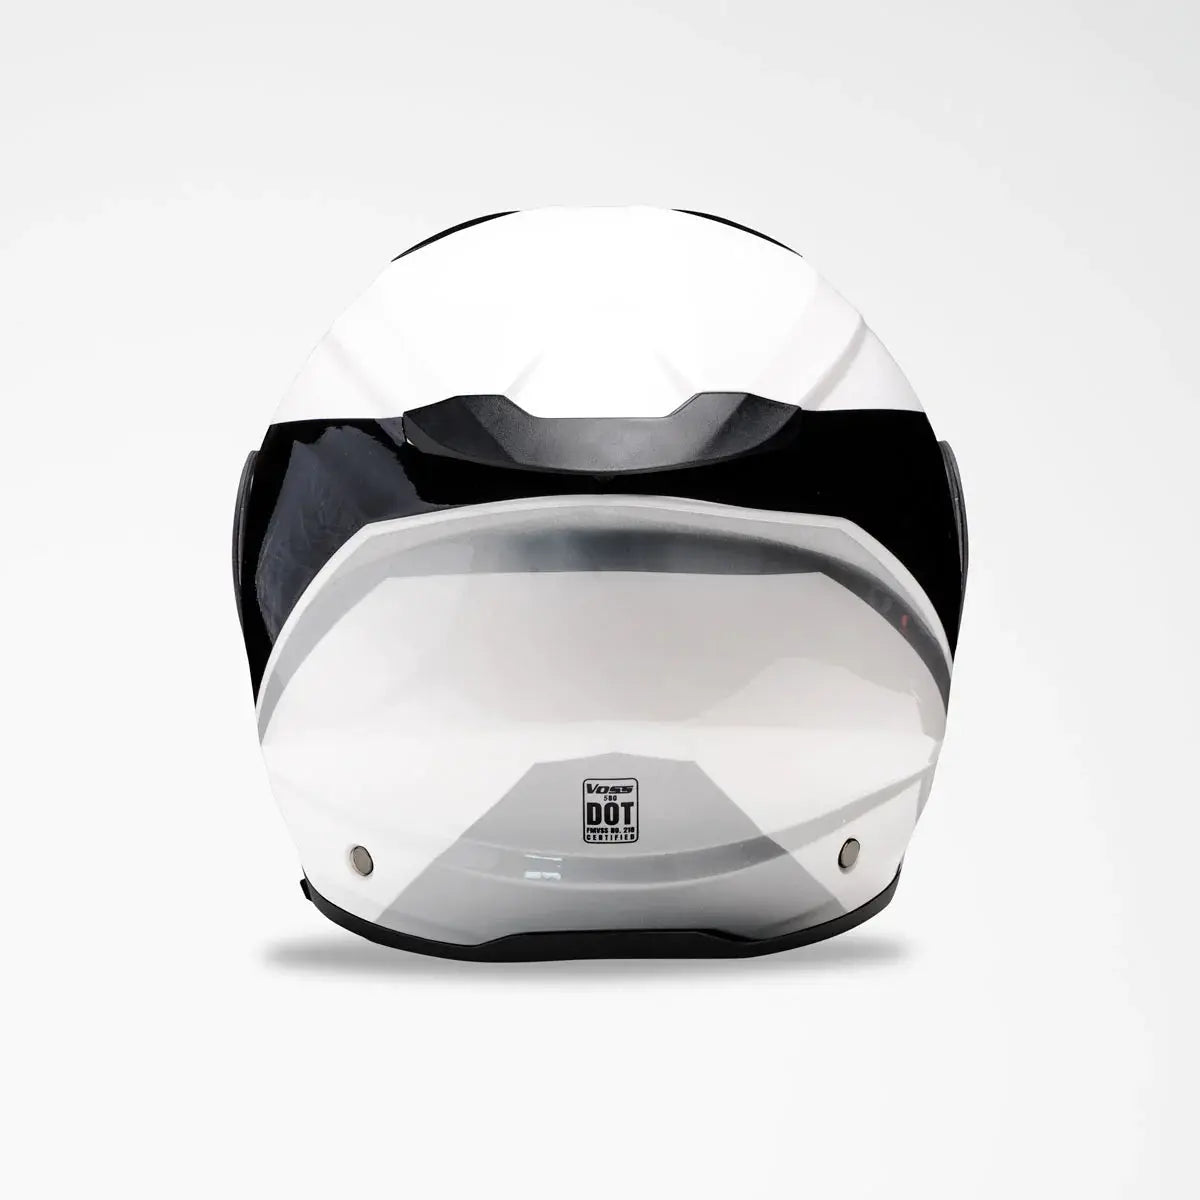 VOSS 580 Conquest Modular Helmet Motorcycle Helmets Boutique of Leathers/Open Road